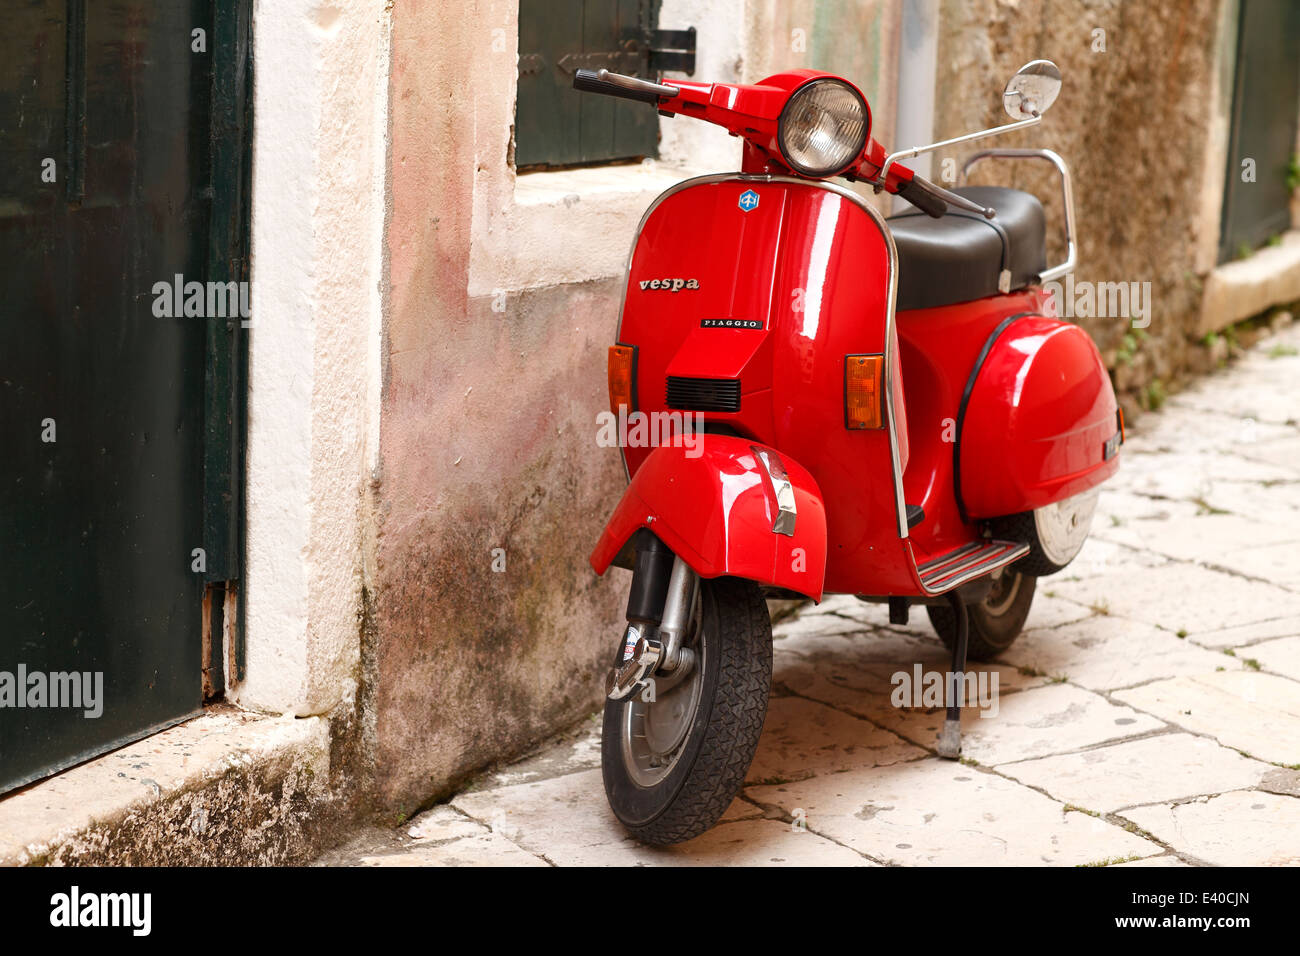 Greece, Ionic Islands, Corfu, red old Vespa scooter parking in front of  house Stock Photo - Alamy